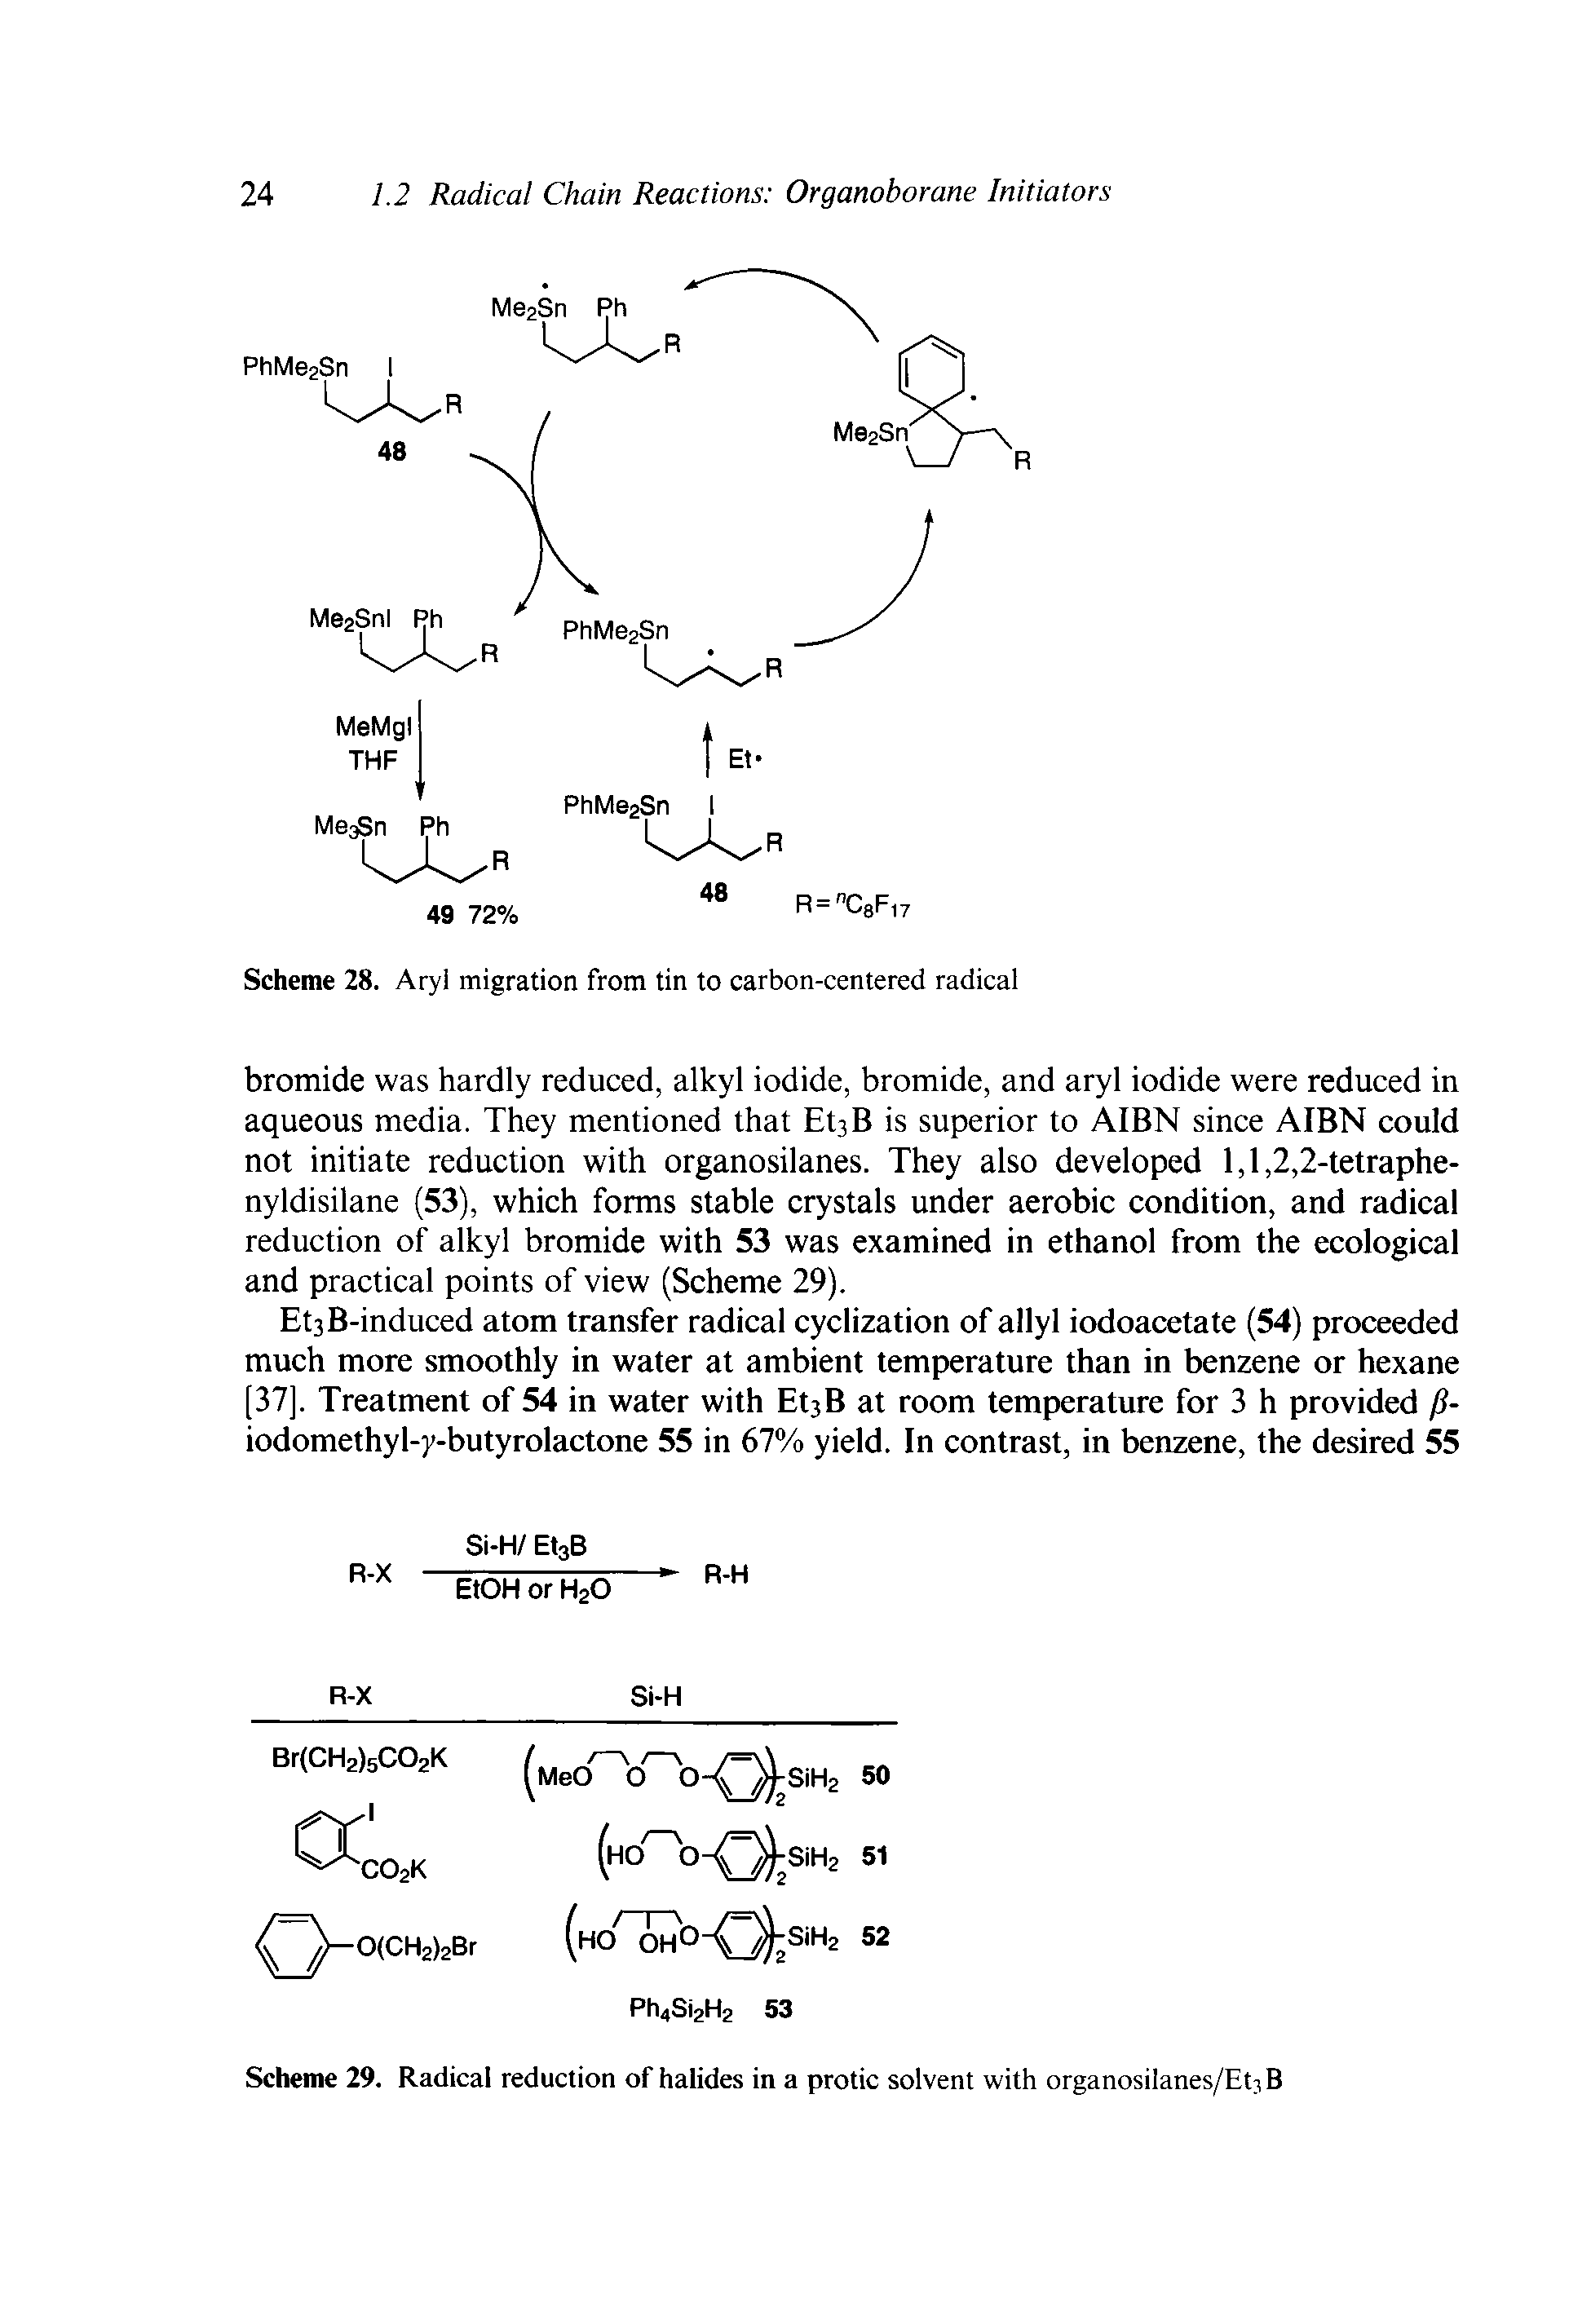 Scheme 28. Aryl migration from tin to carbon-centered radical...